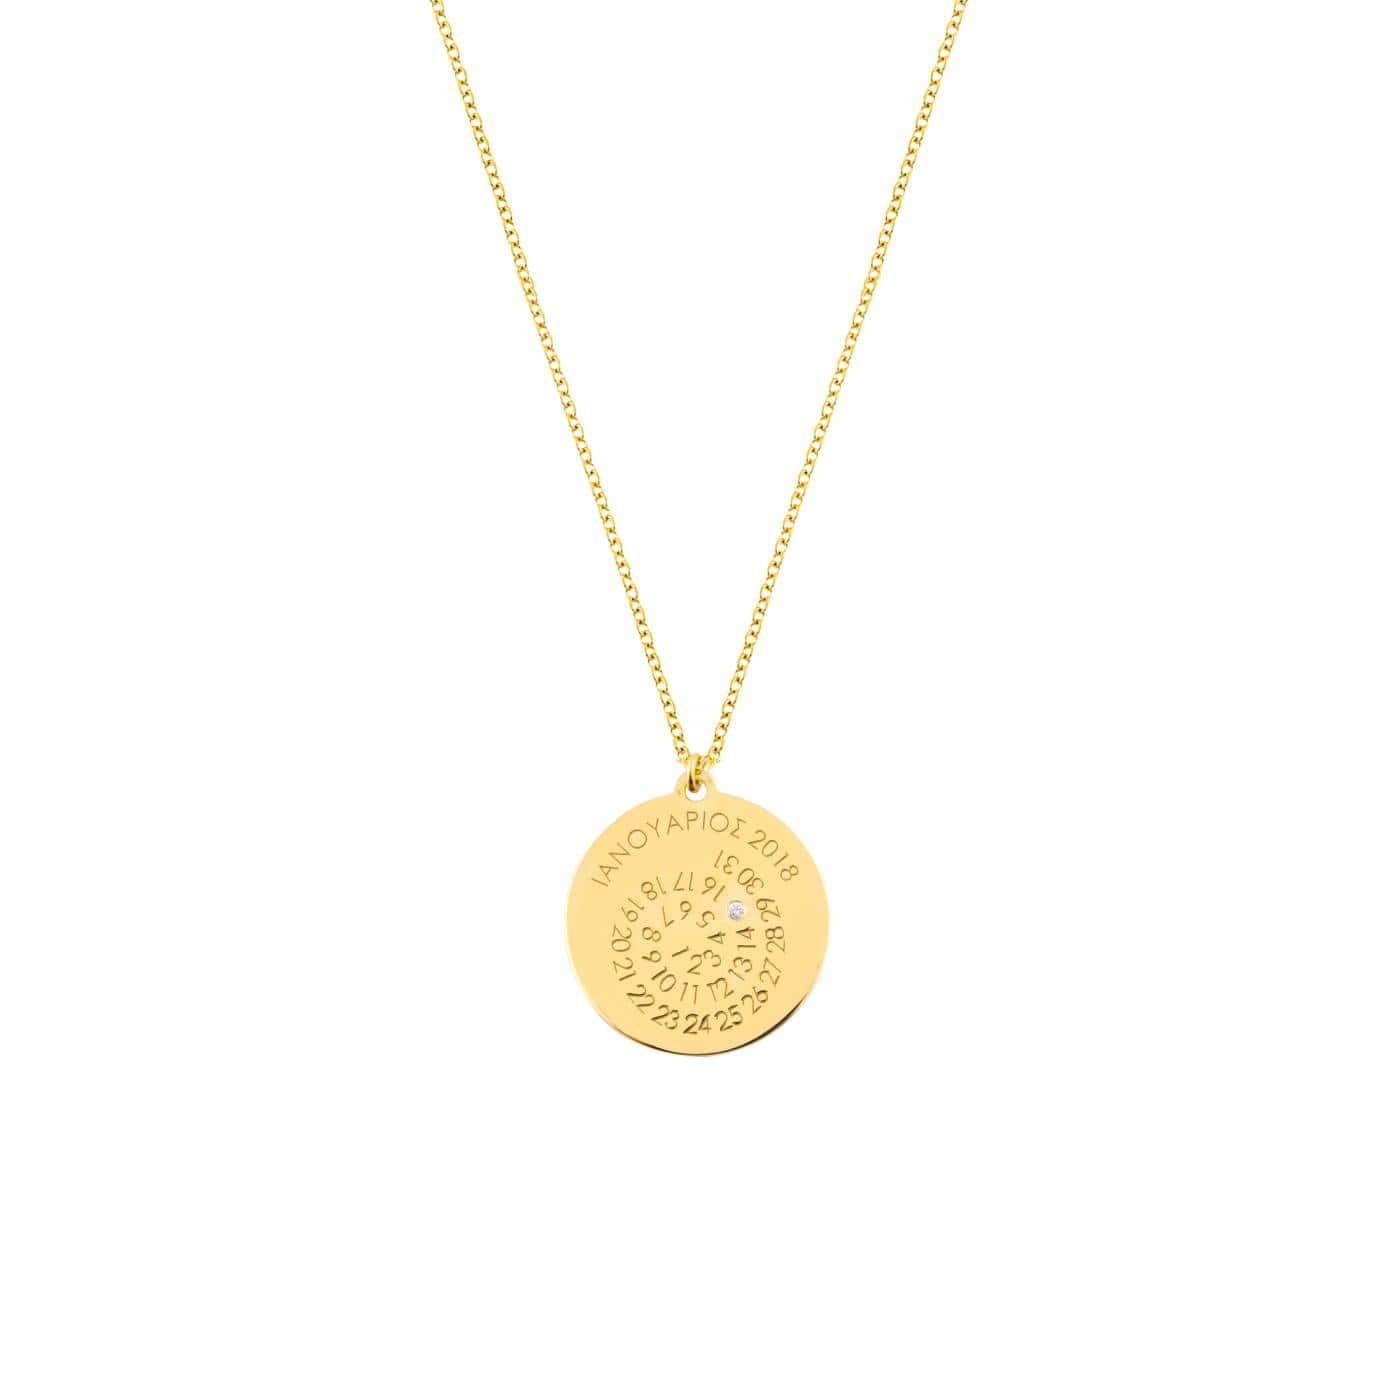 GOLD 14K NECKLACE WITH DIAMOND